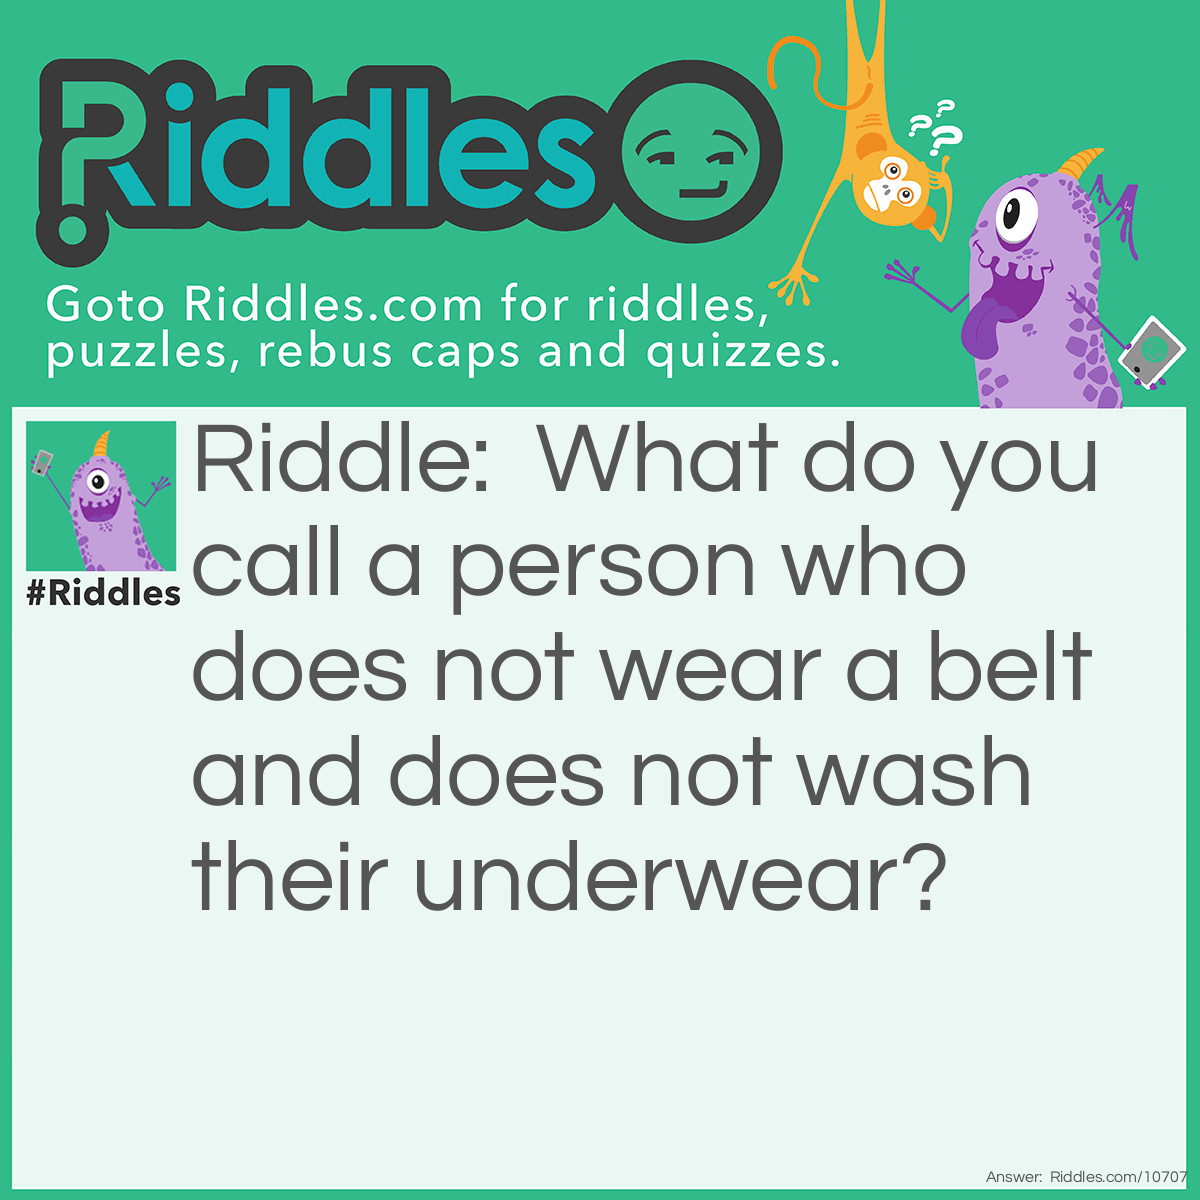 Riddle: What do you call a person who does not wear a belt and does not wash their underwear? Answer: They have no high-jean.